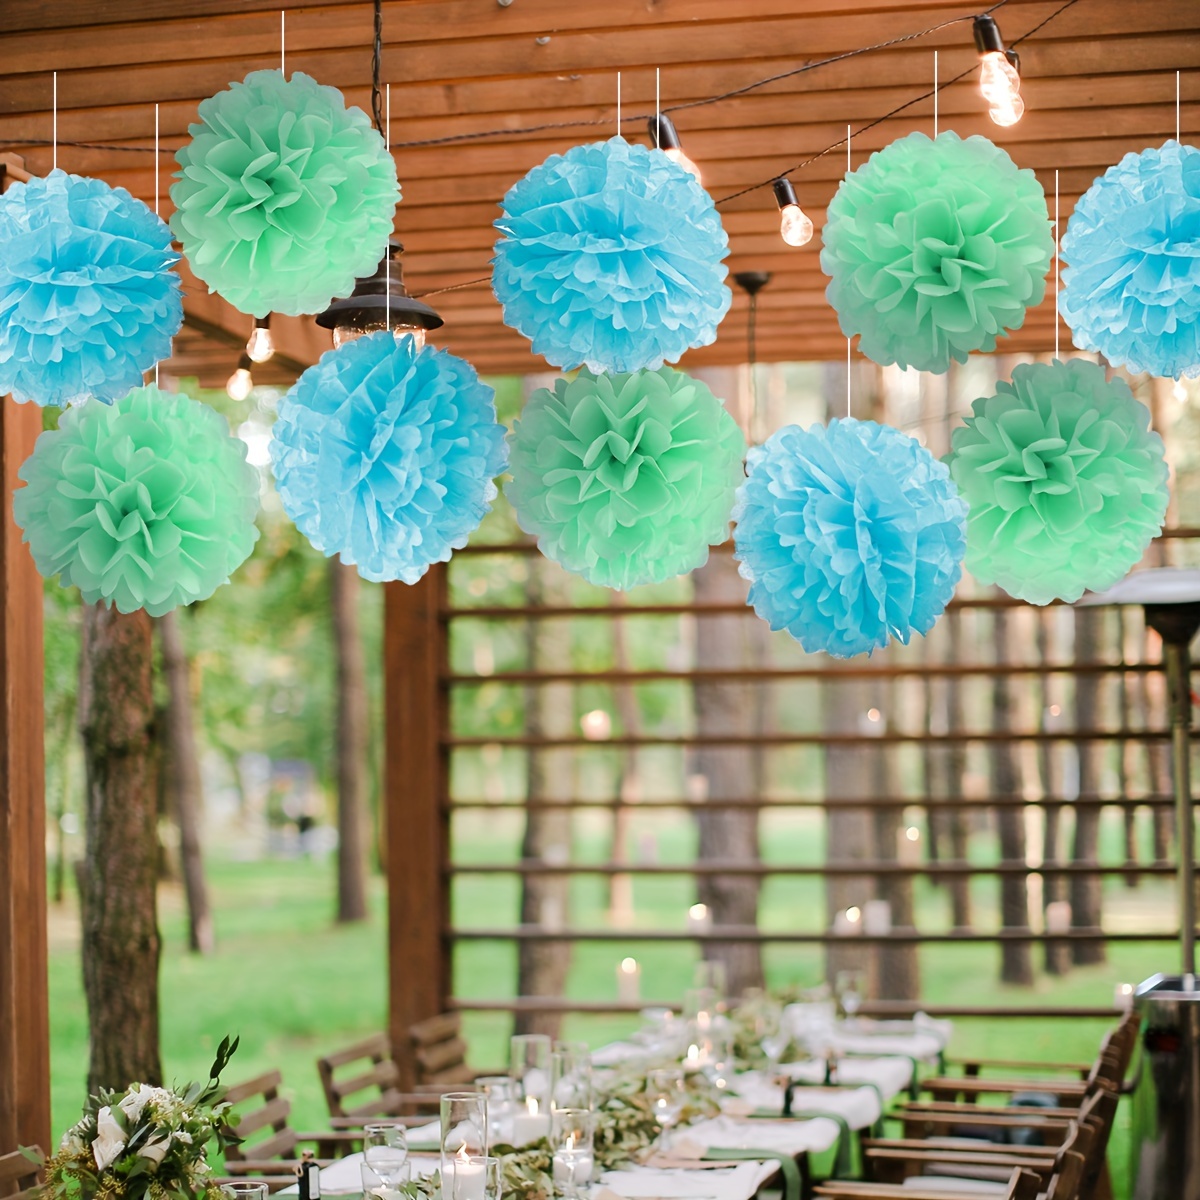 15pcs 25cm(10inch) Teal Green Tissue Paper Pom Poms Wedding Party  Decoration, Paper Flower Ball Home Decoration - AliExpress